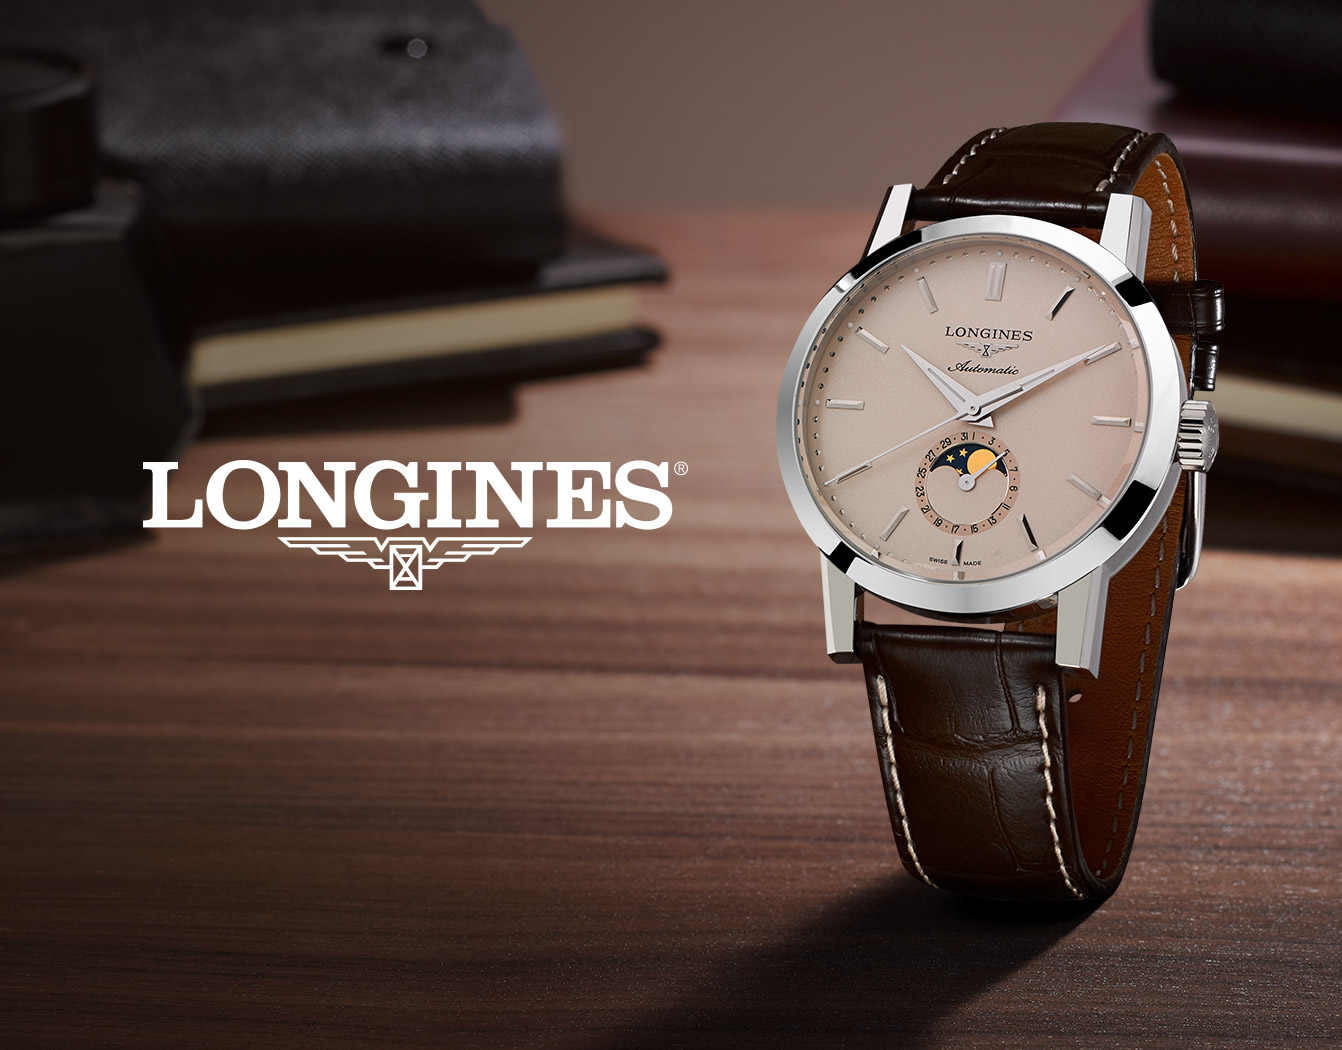 A New Chapter in Longines 1832 Iconic Tale